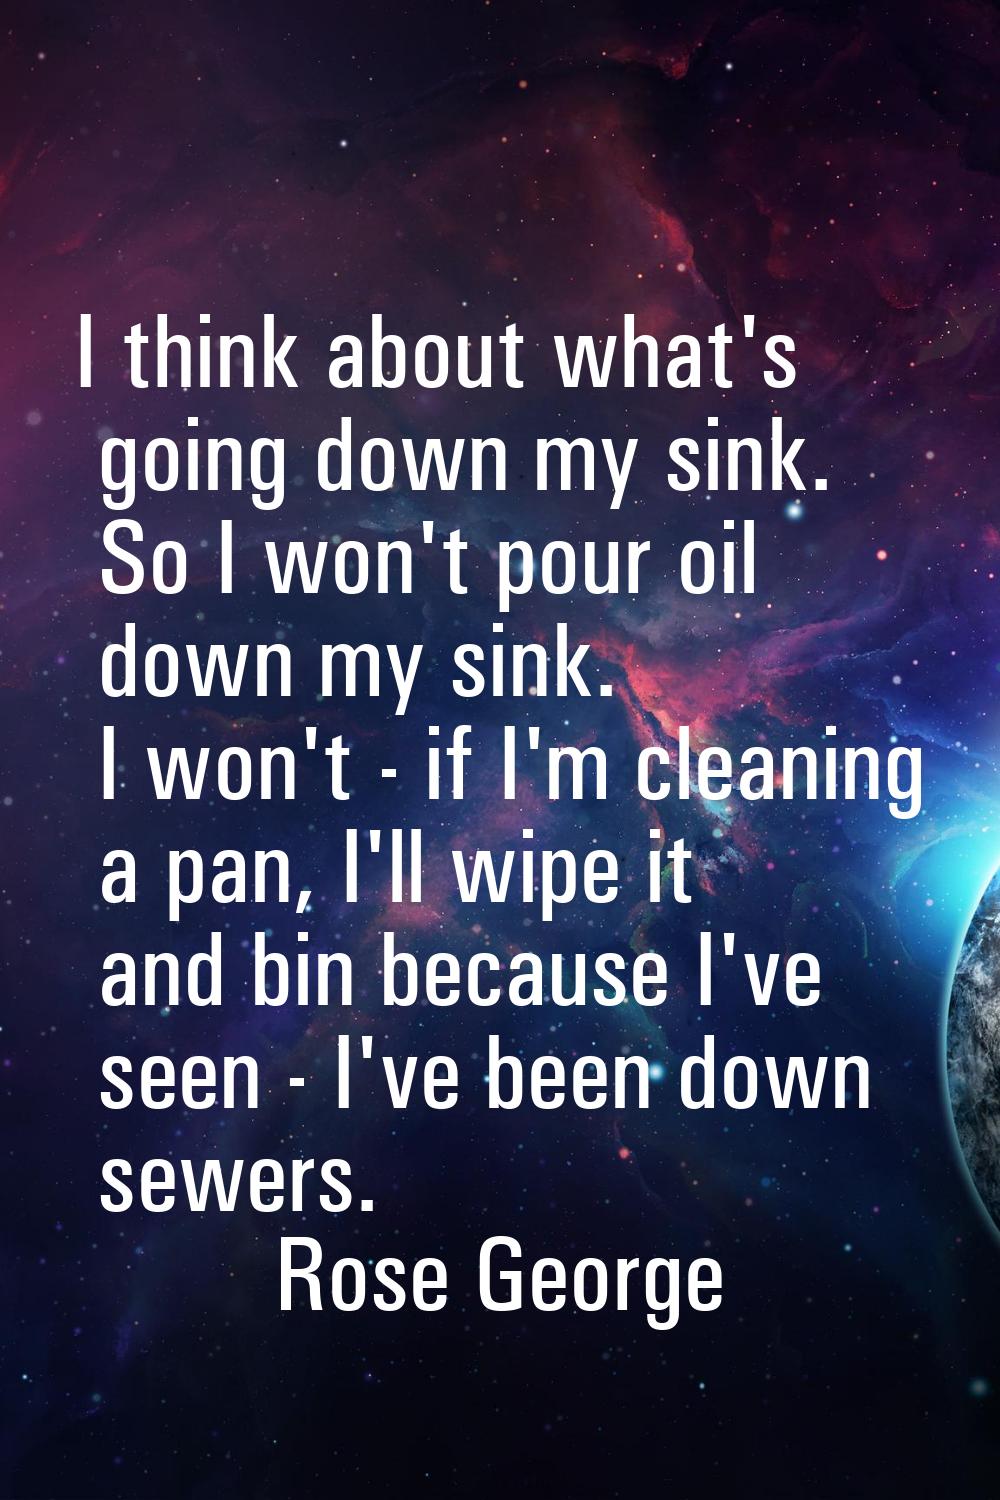 I think about what's going down my sink. So I won't pour oil down my sink. I won't - if I'm cleanin